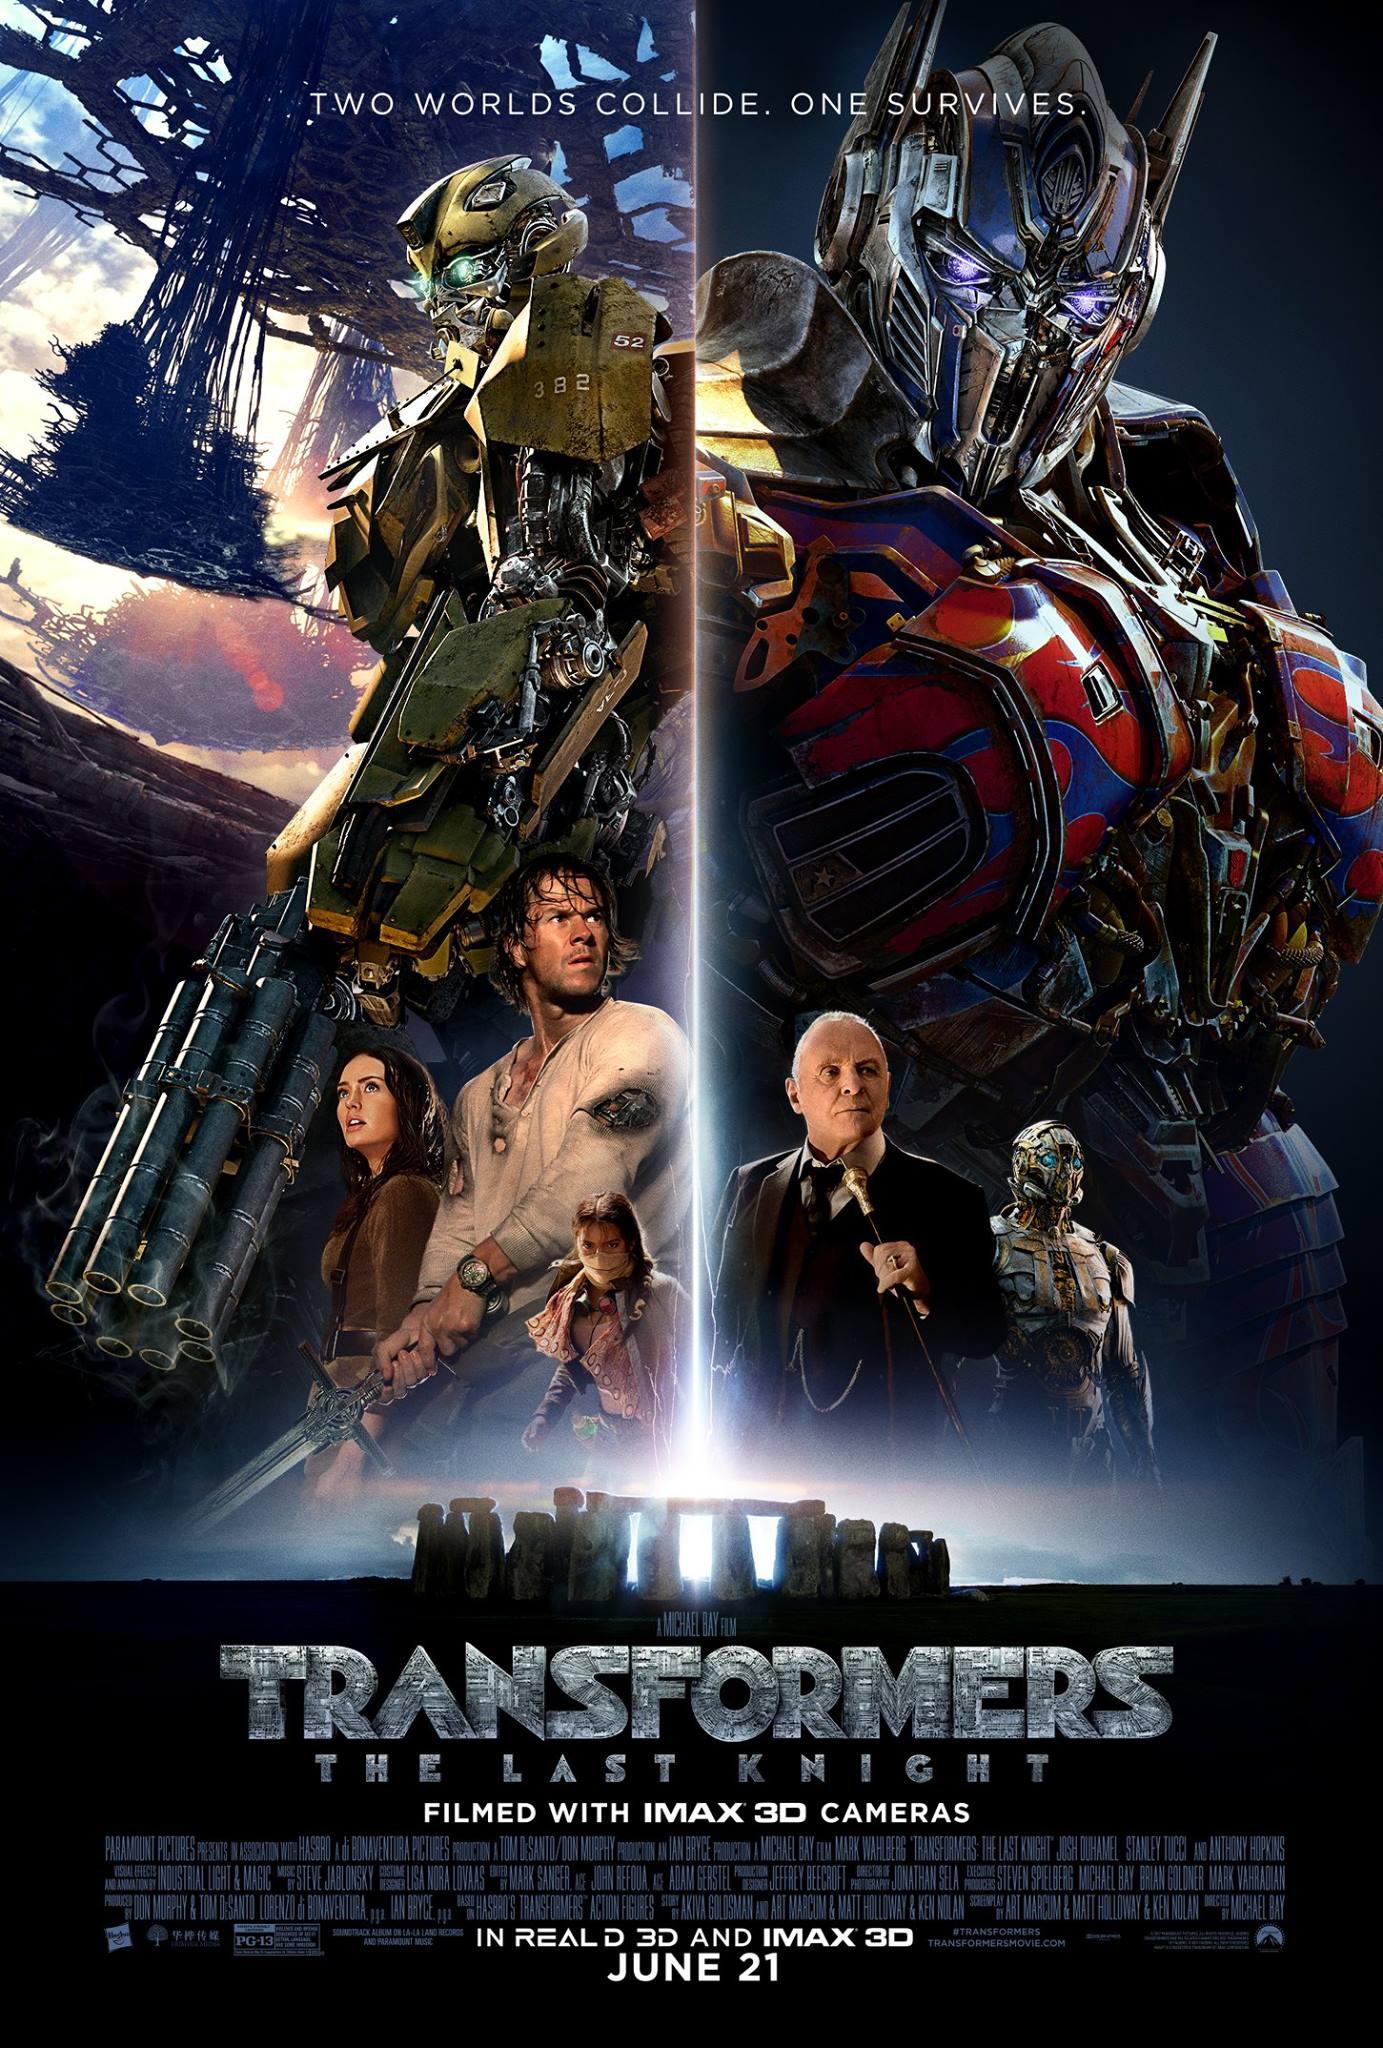 Transformers: The Last Knight. Teletraan I: The Transformers